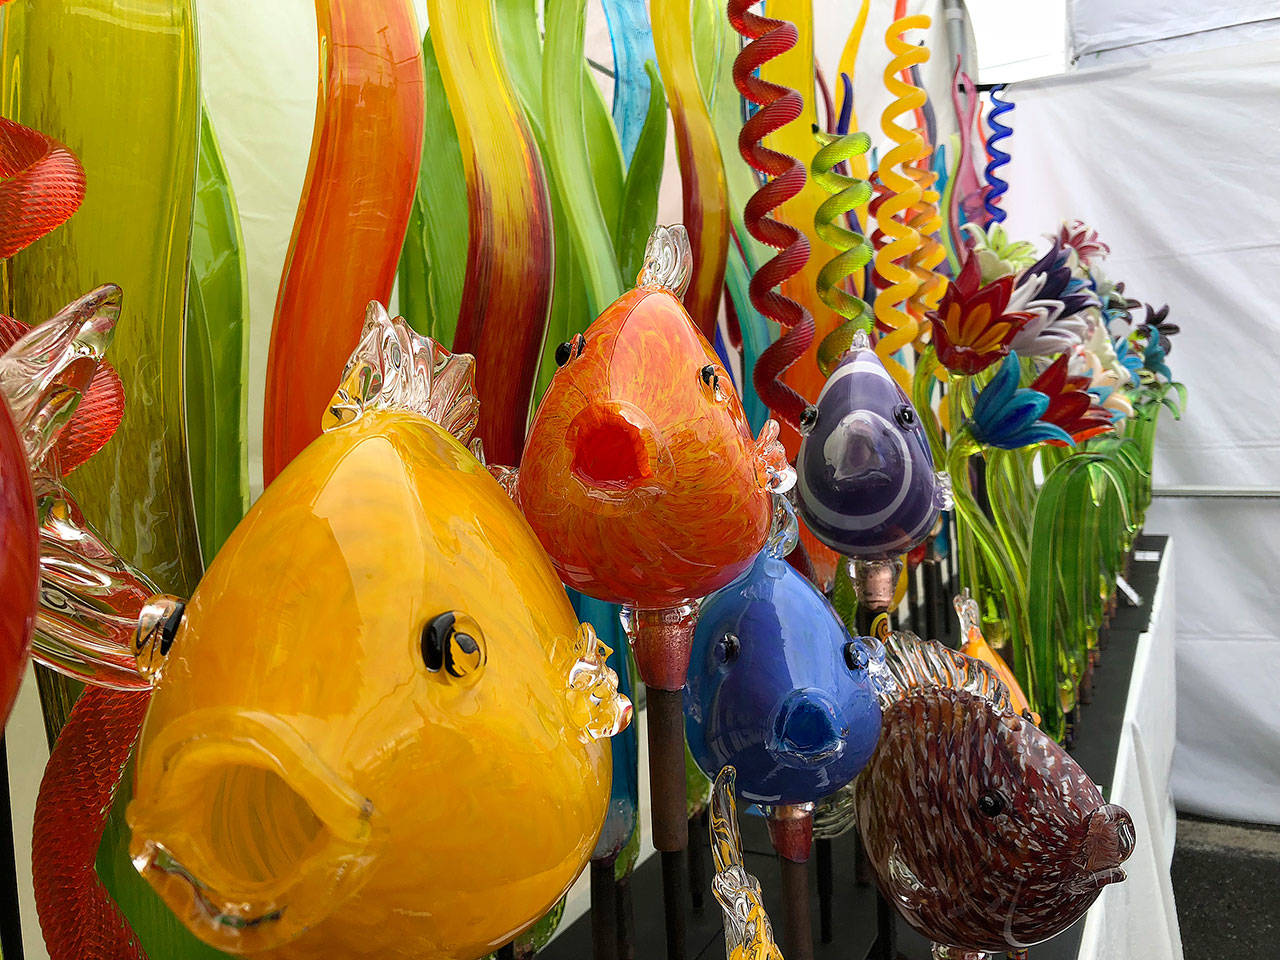 A school of glass fish are displayed in Rob Adamson’s tent at the Coupeville Arts and Crafts Festival Saturday. The Langley artist said hes been to about 50 festivals during his career and that the rain on Saturday didn’t faze him, although the wind the night before was concerning. Photo by Emily Gilbert/Whidbey News Group